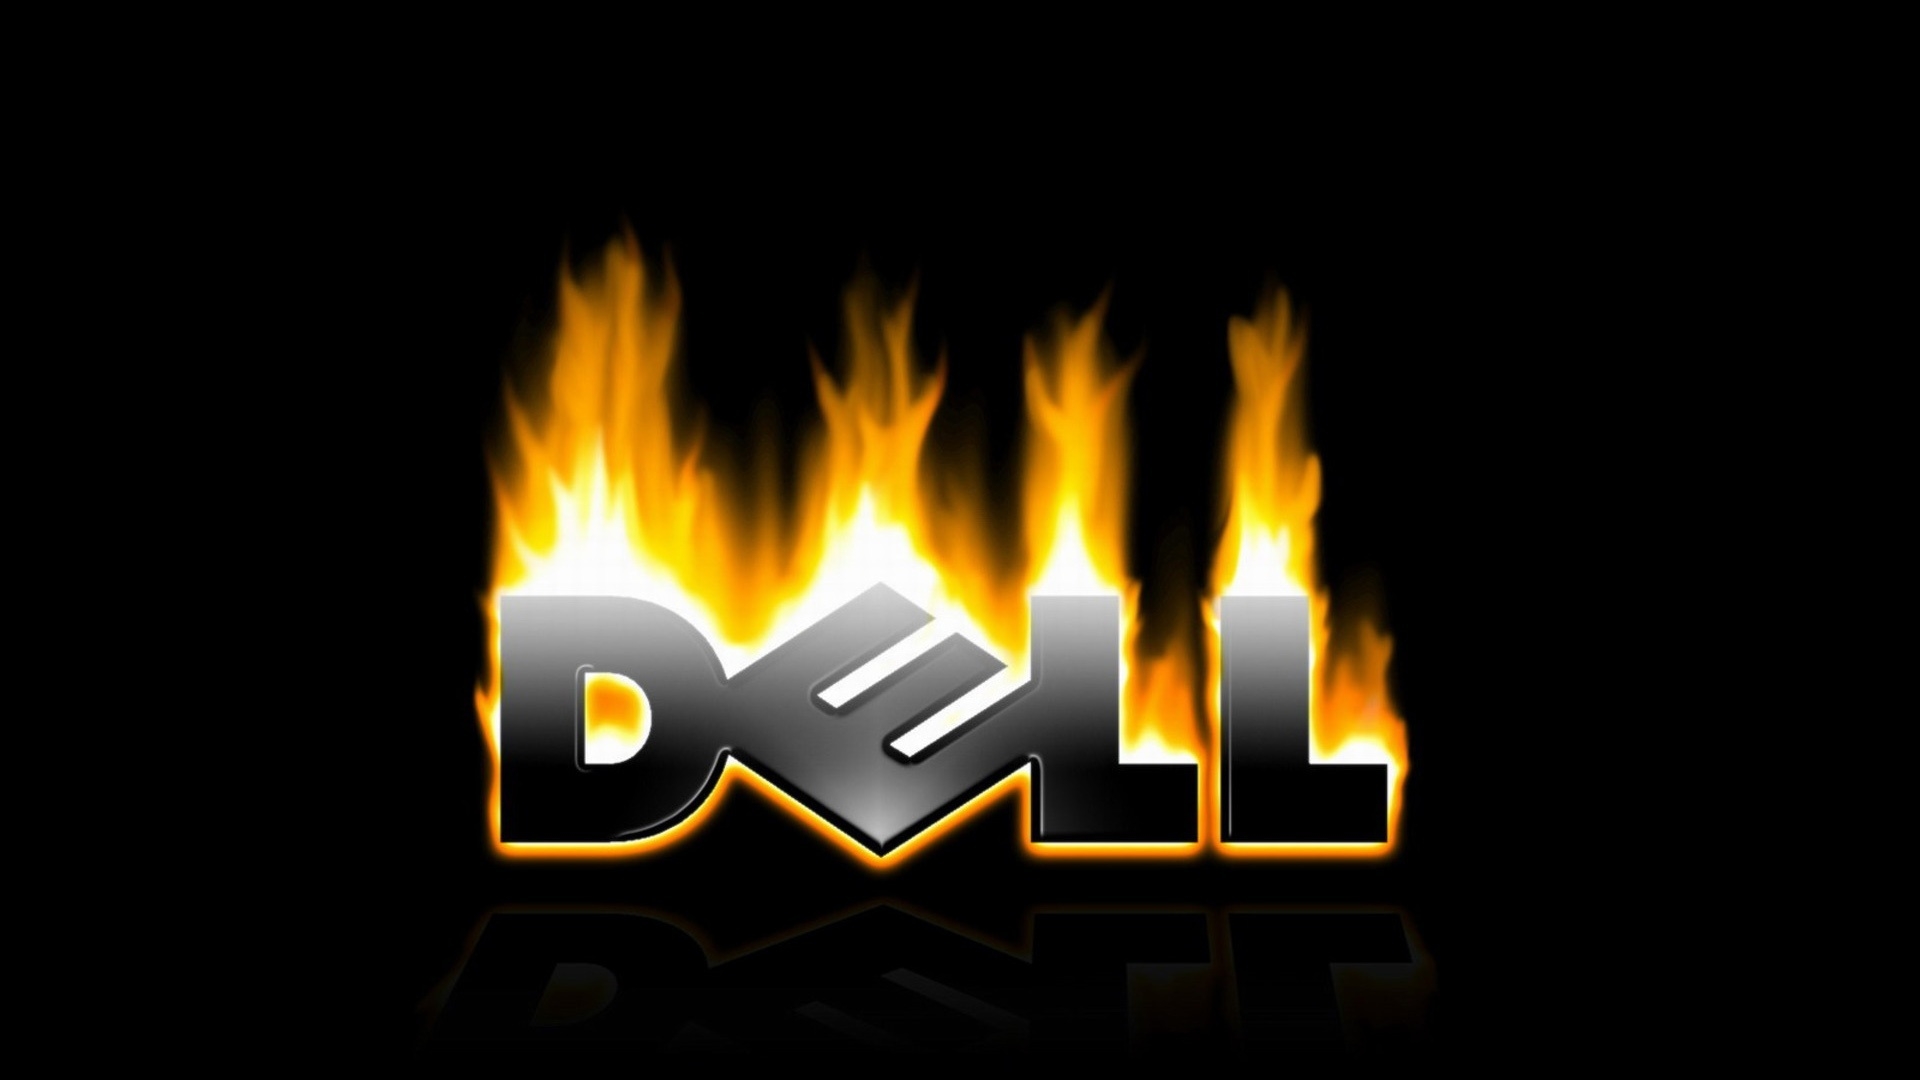 Dell in fire for 1920 x 1080 HDTV 1080p resolution